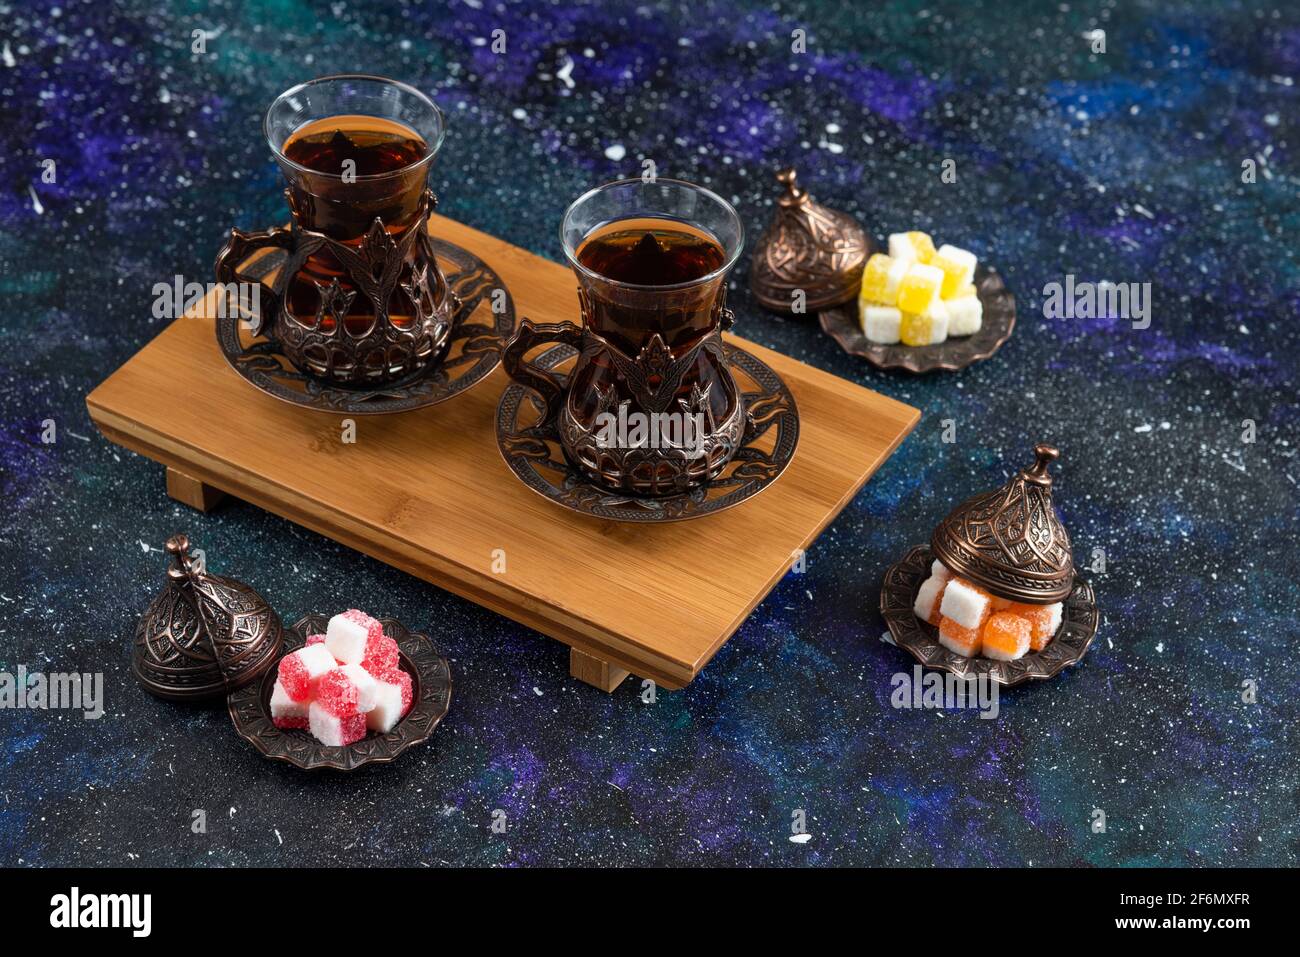 Top view of Two glass tea on wooden board and candies on blue background Stock Photo